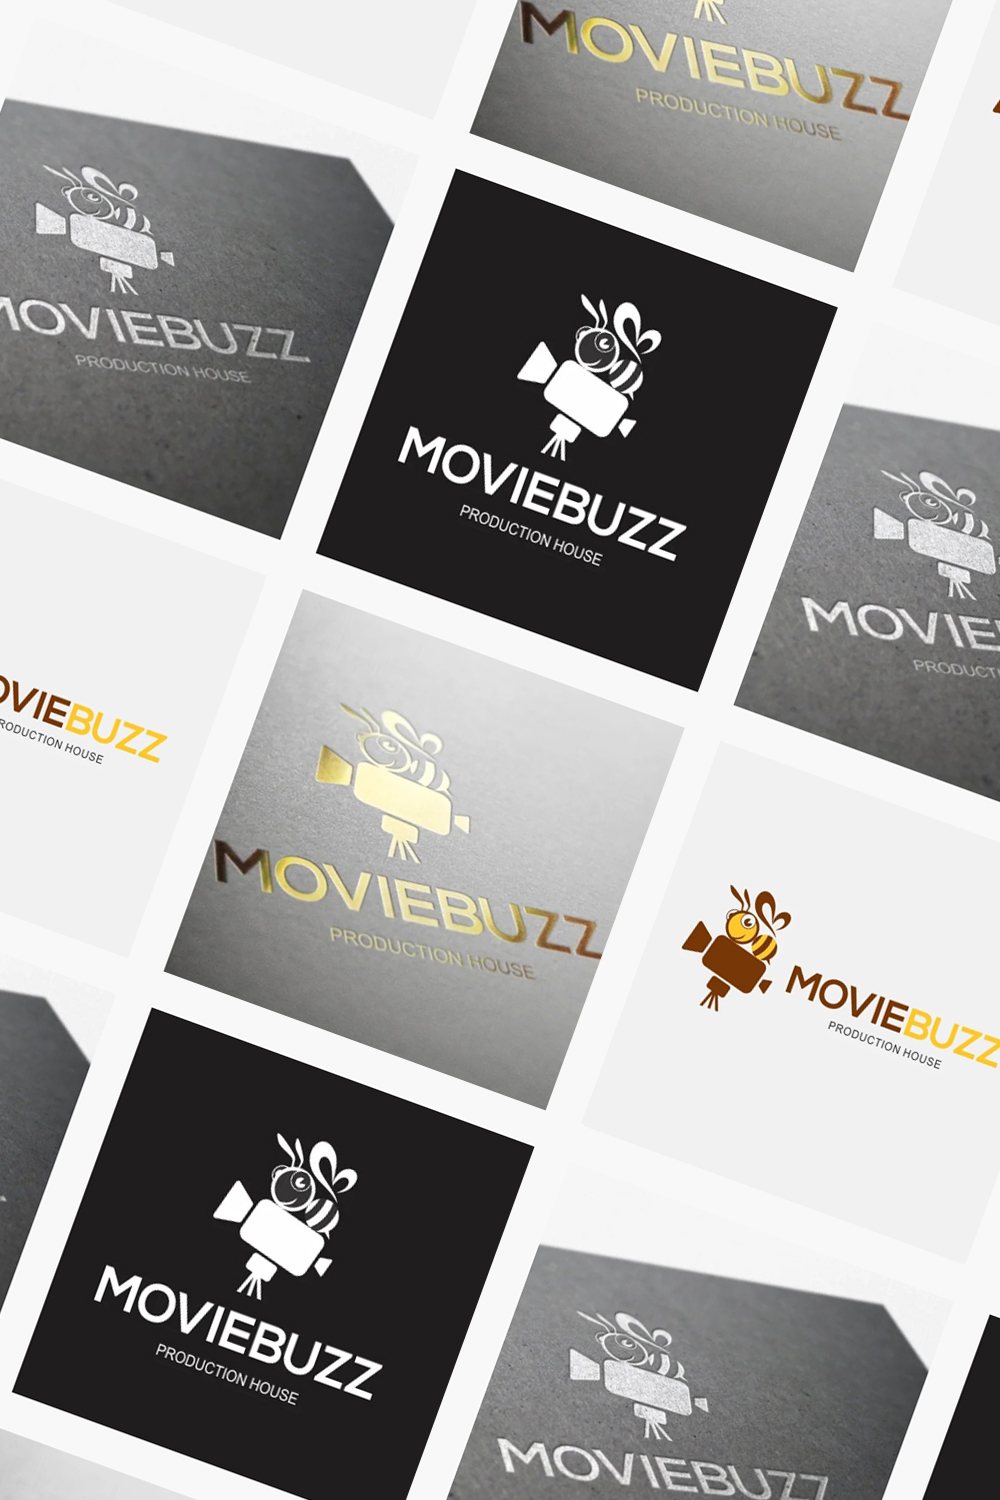 Lots of Moviebuzz logo options in different colors.